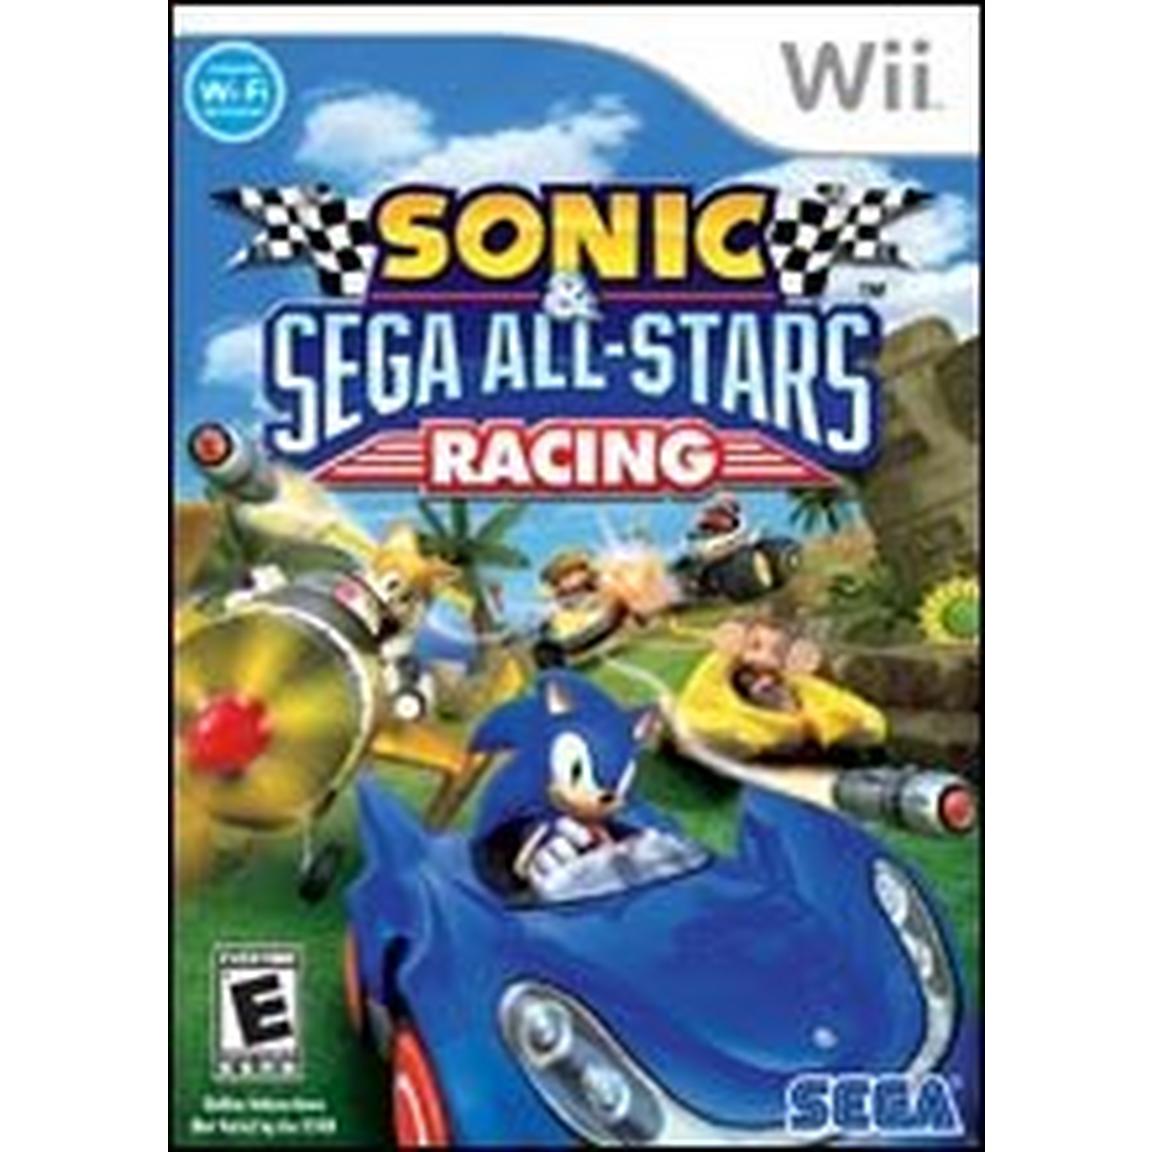 Sonic and SEGA All-Stars Racing - Nintendo Wii, Pre-Owned